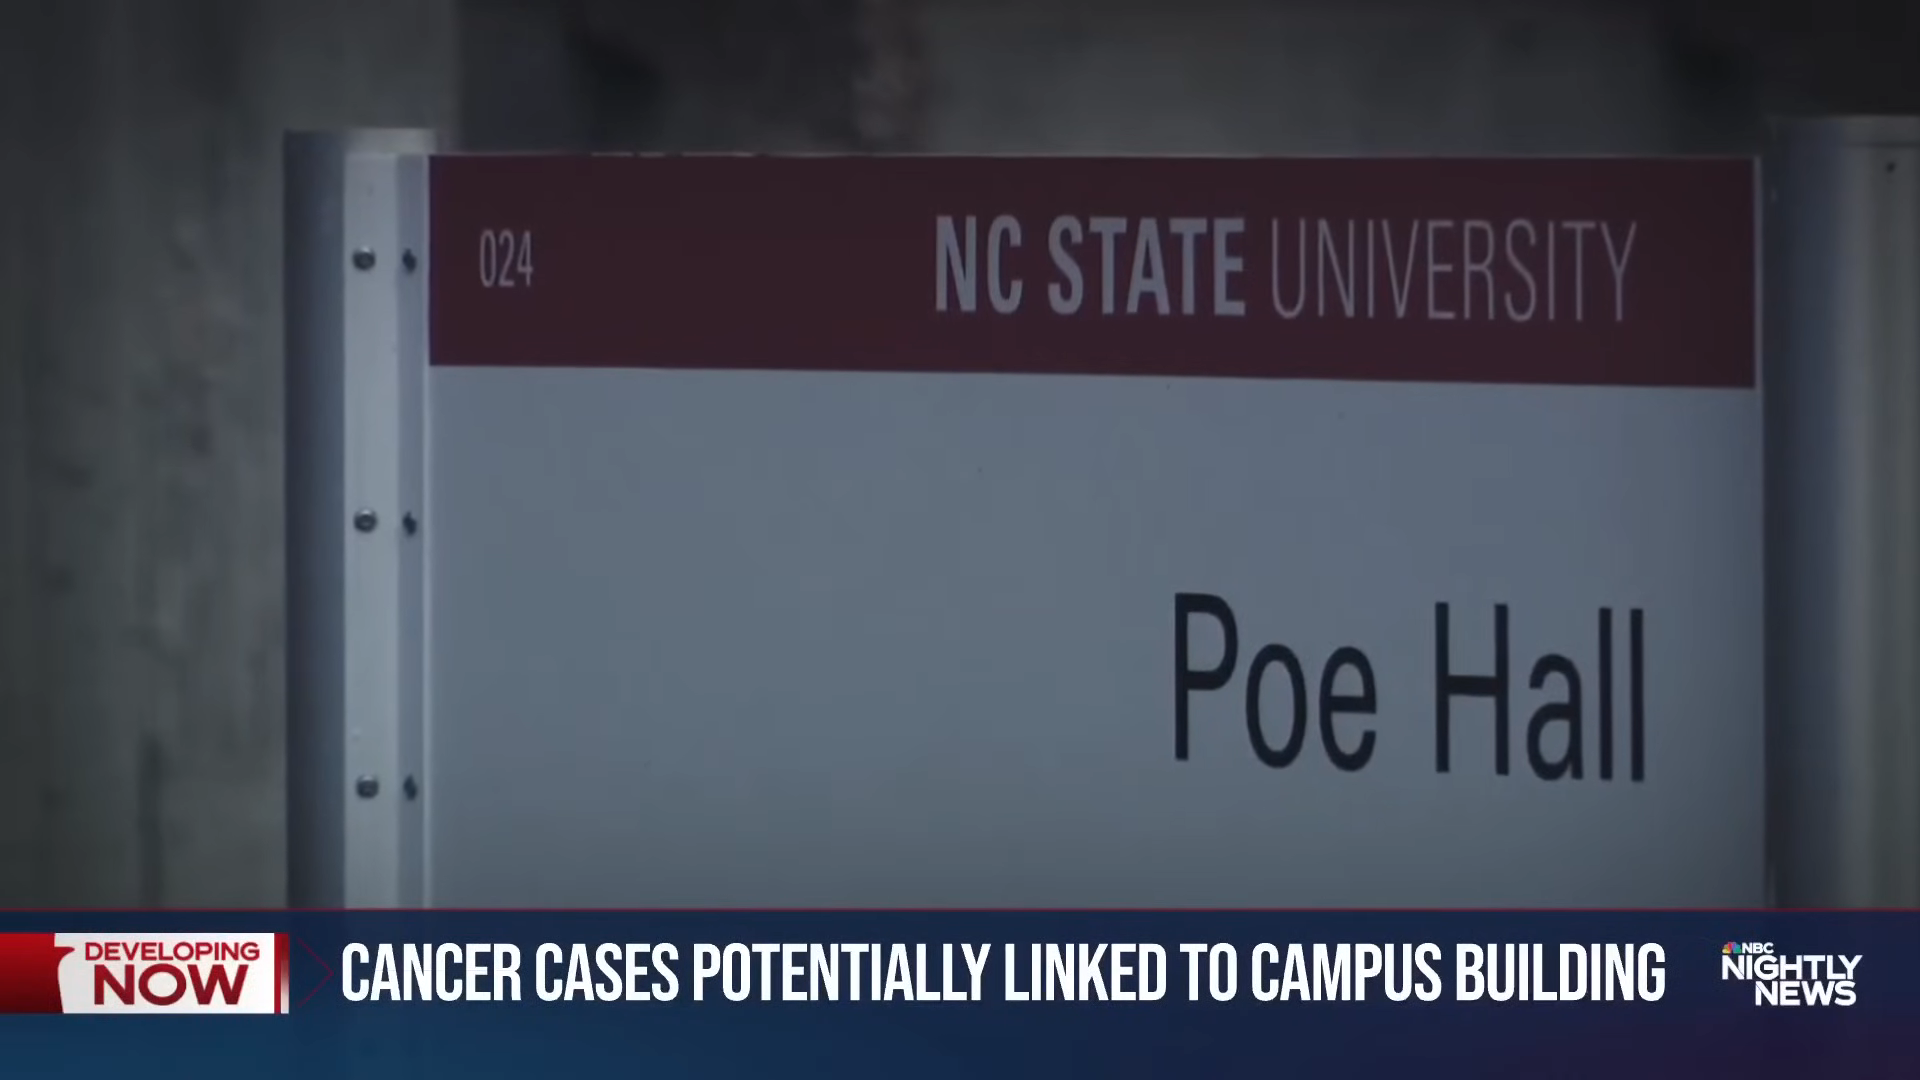 Sign reading &quot;Poe Hall&quot; at NC State University with a news banner about cancer cases possibly linked to a campus building